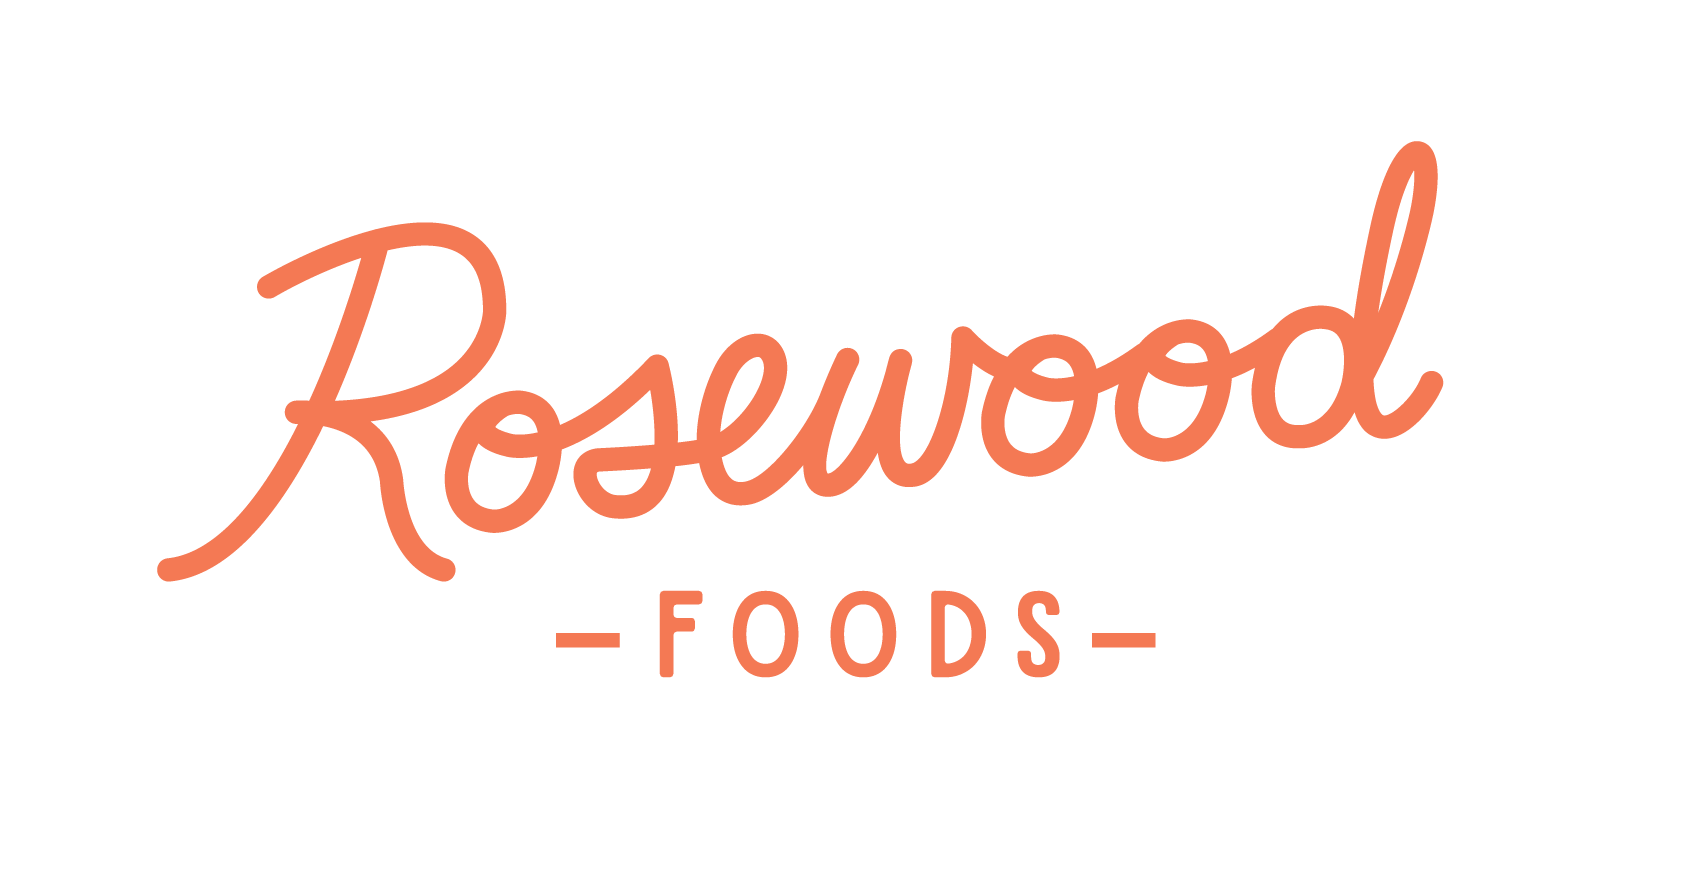 RosewoodFoods-TerraCotta